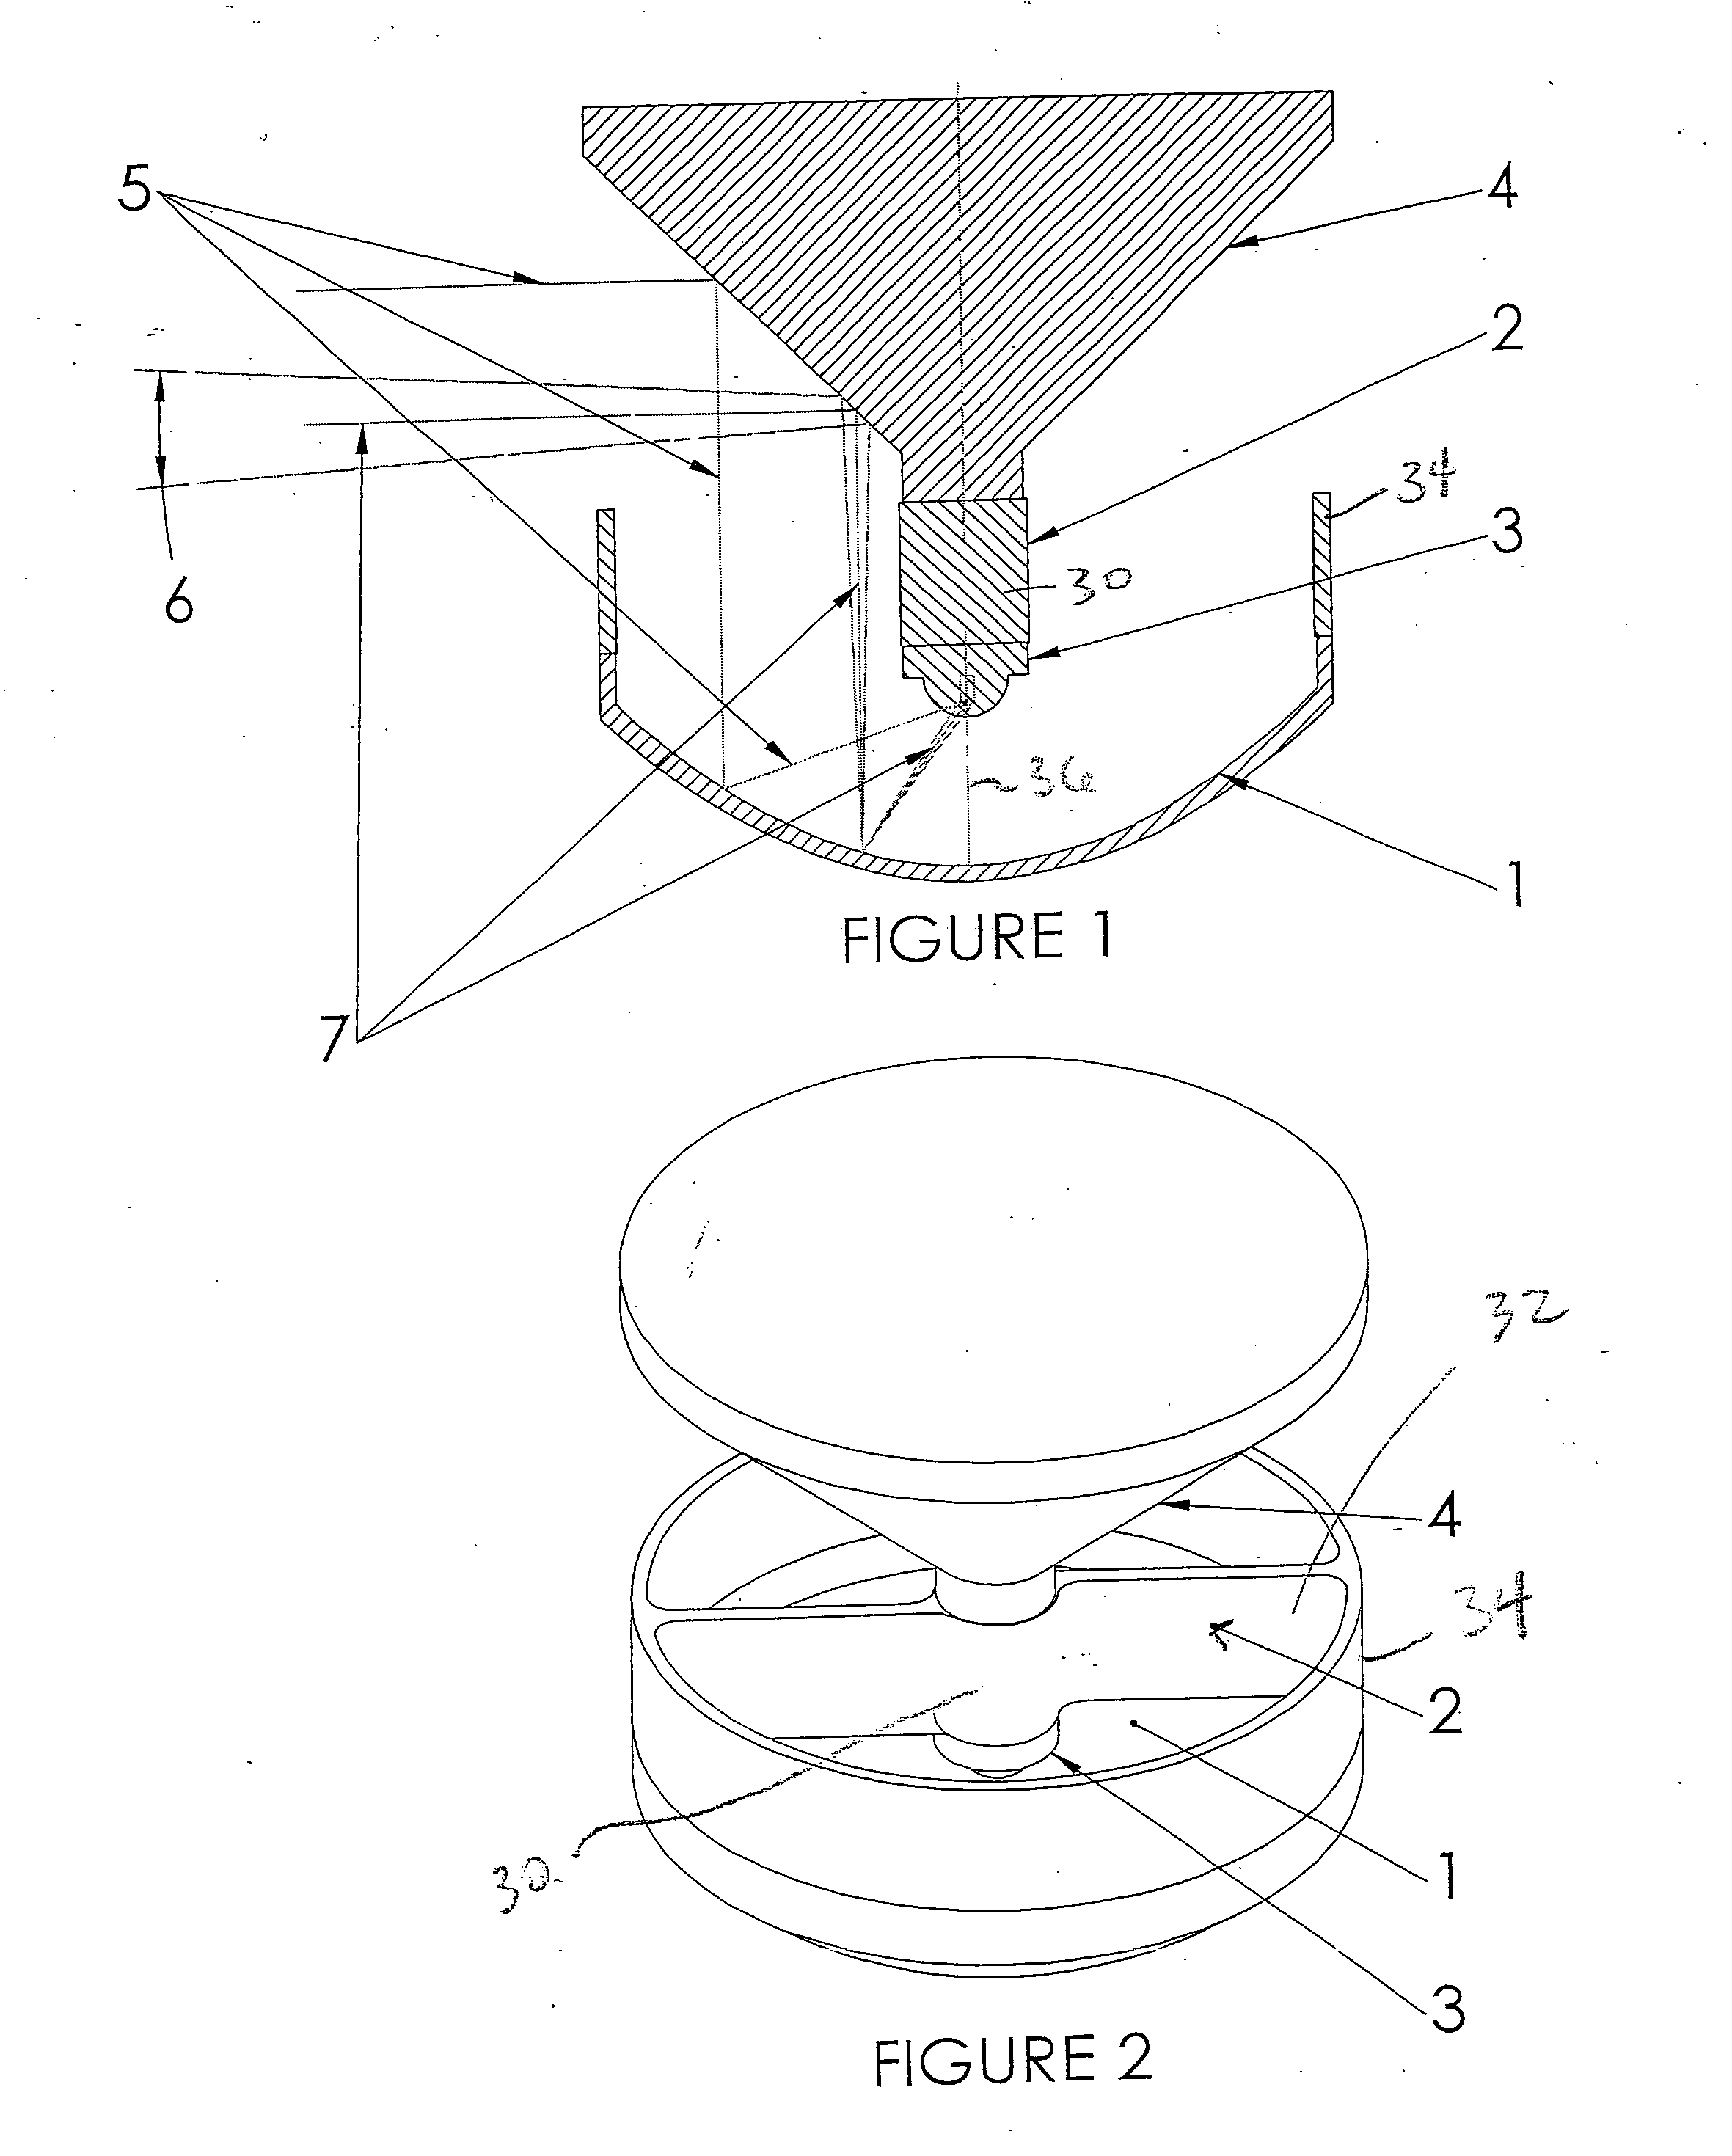 Apparatus and method for using emitting diodes (LED) in a side-emitting device